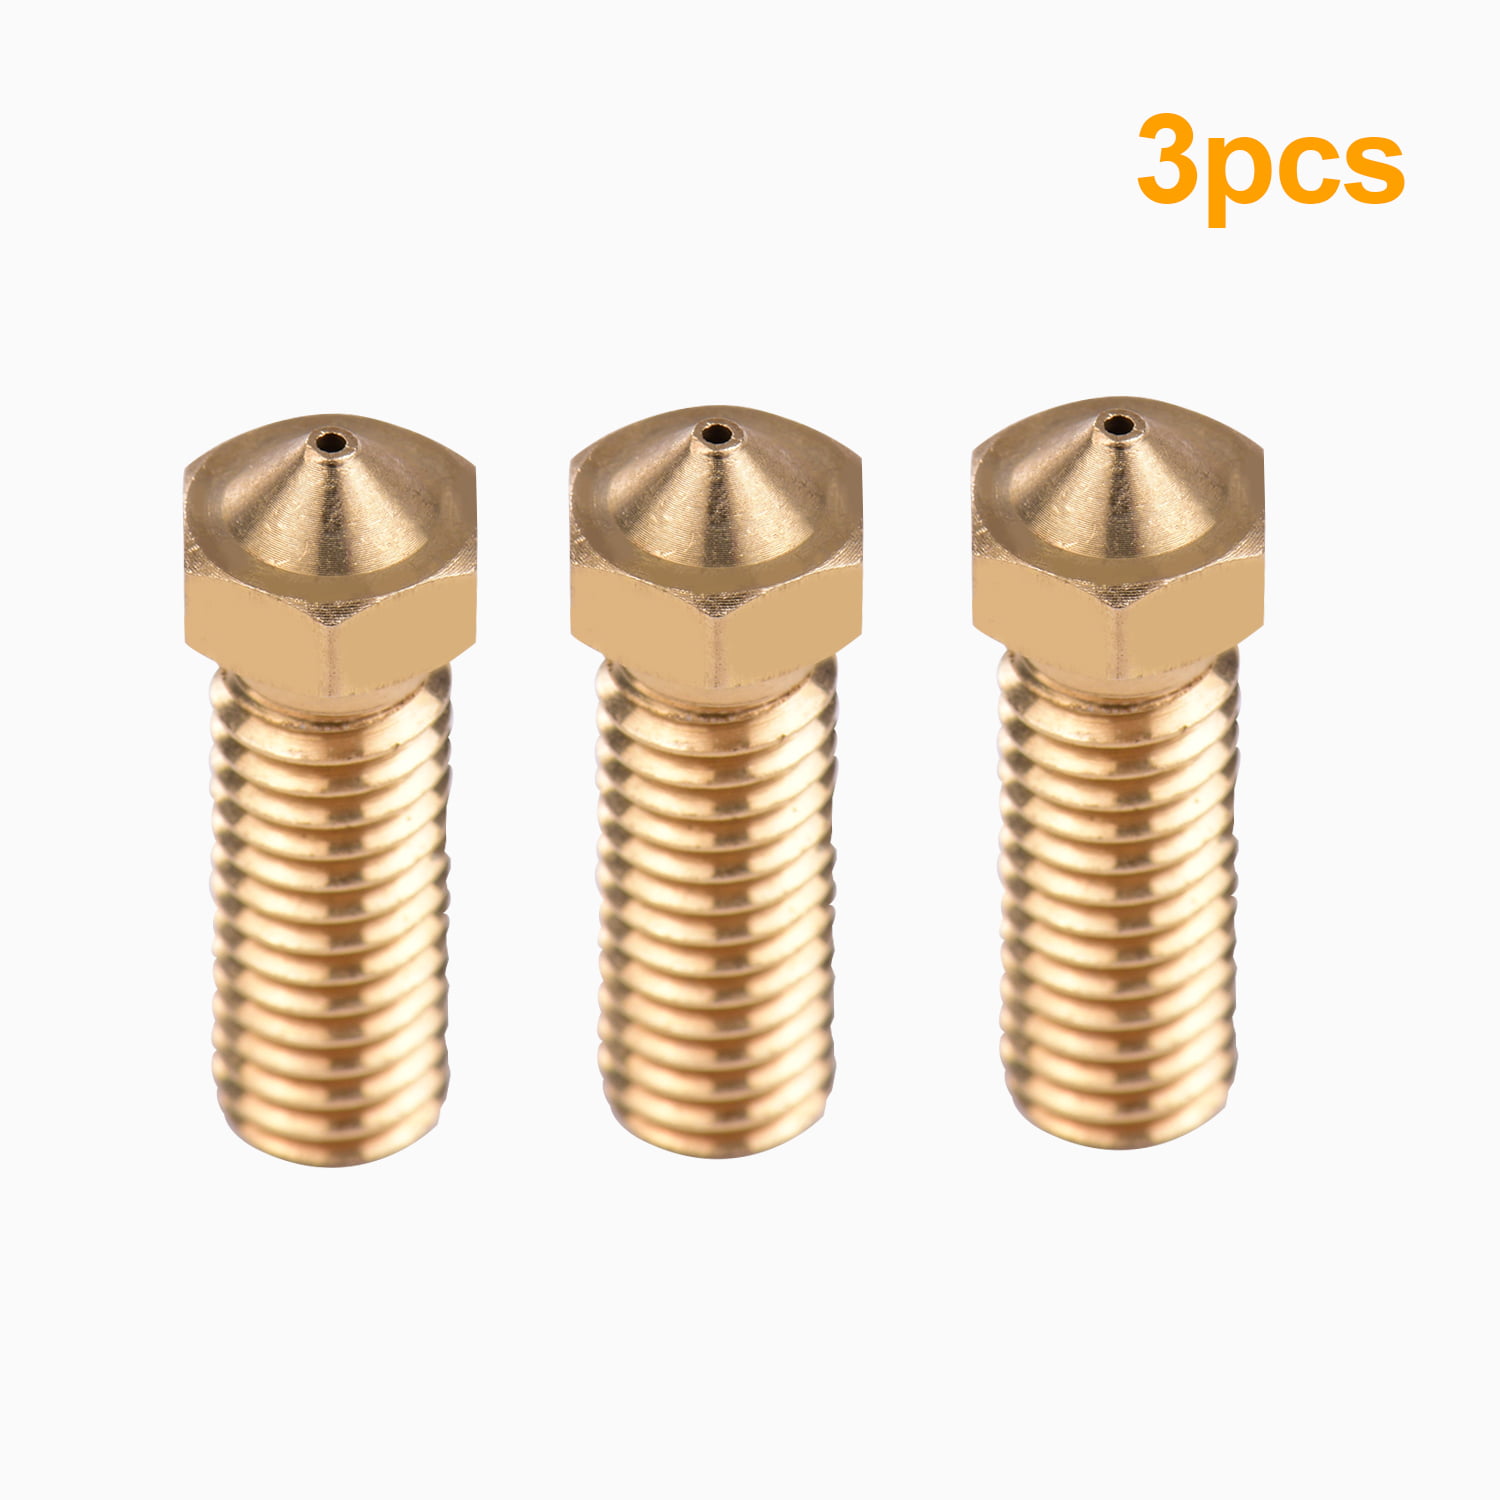 Aibecy 3pcs 3D Printer Extruder Stainless Steel  Nozzle M6 Thread G4R3